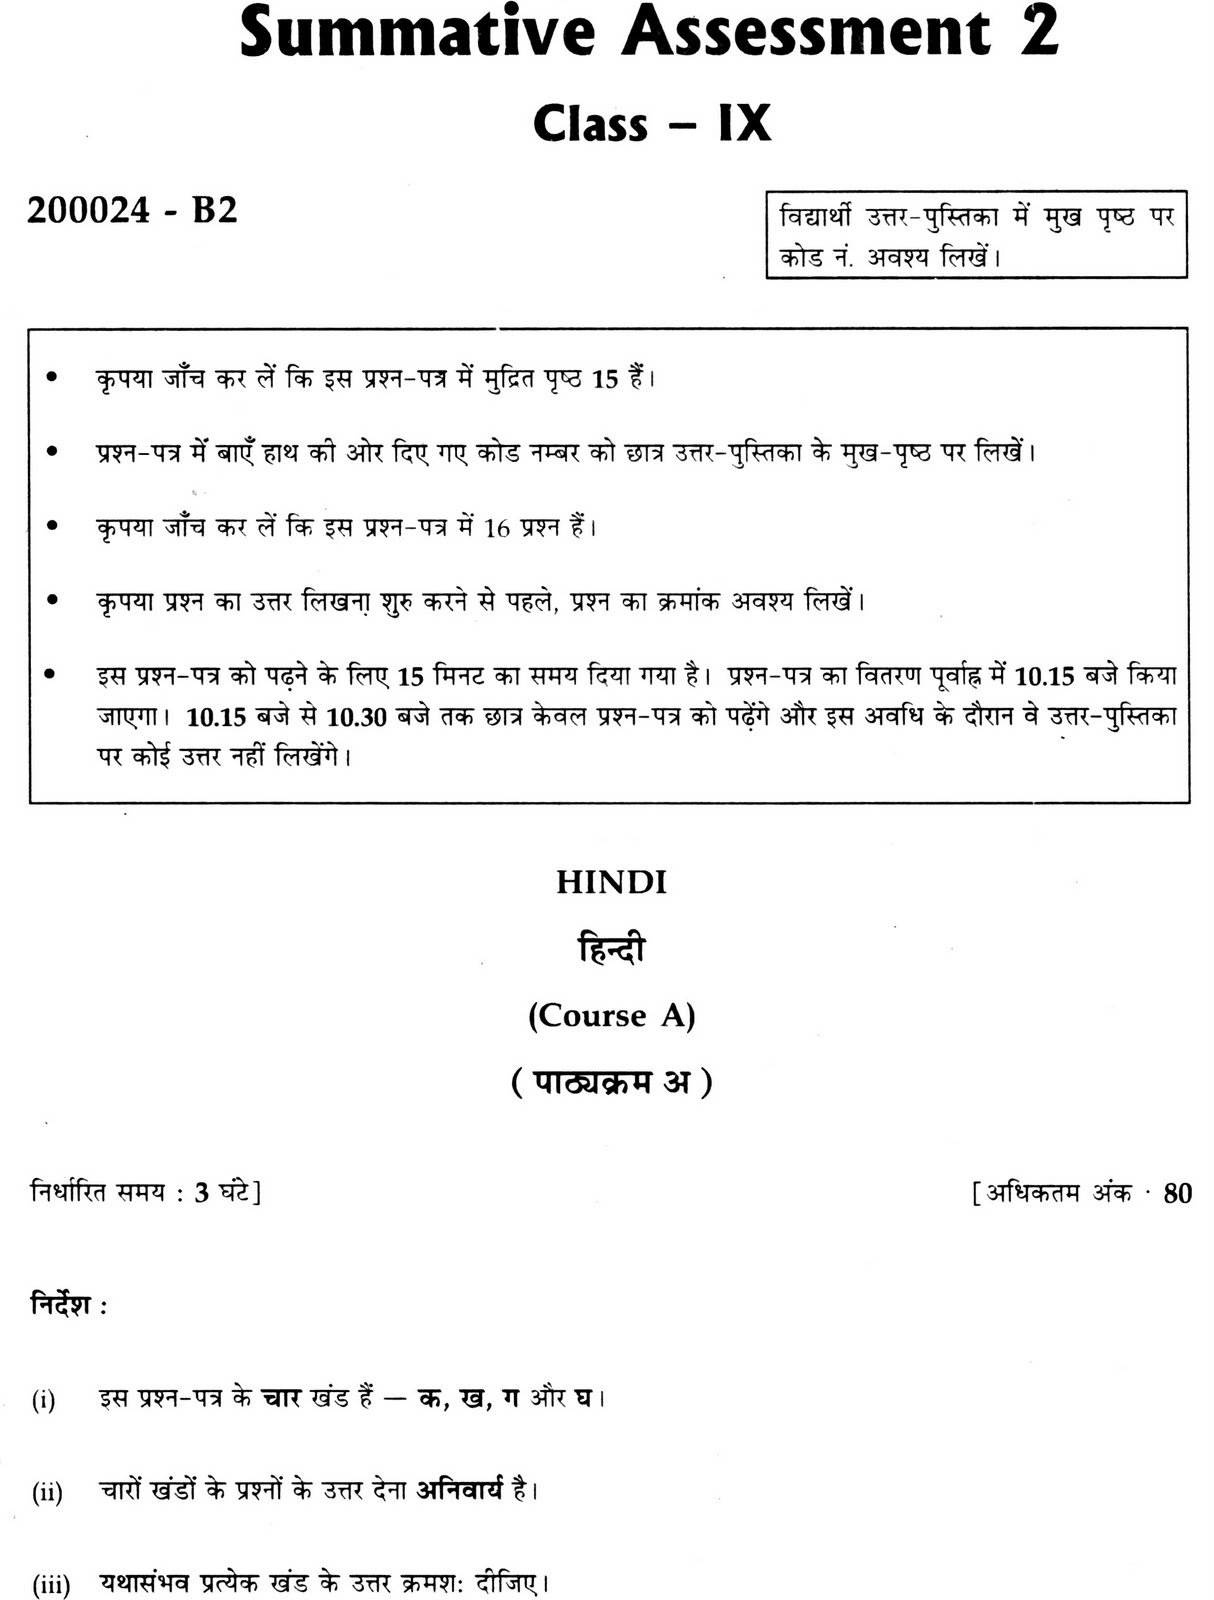 Class 24 Hindi (Course A) Guess Paper-24 for Summative Assessment II